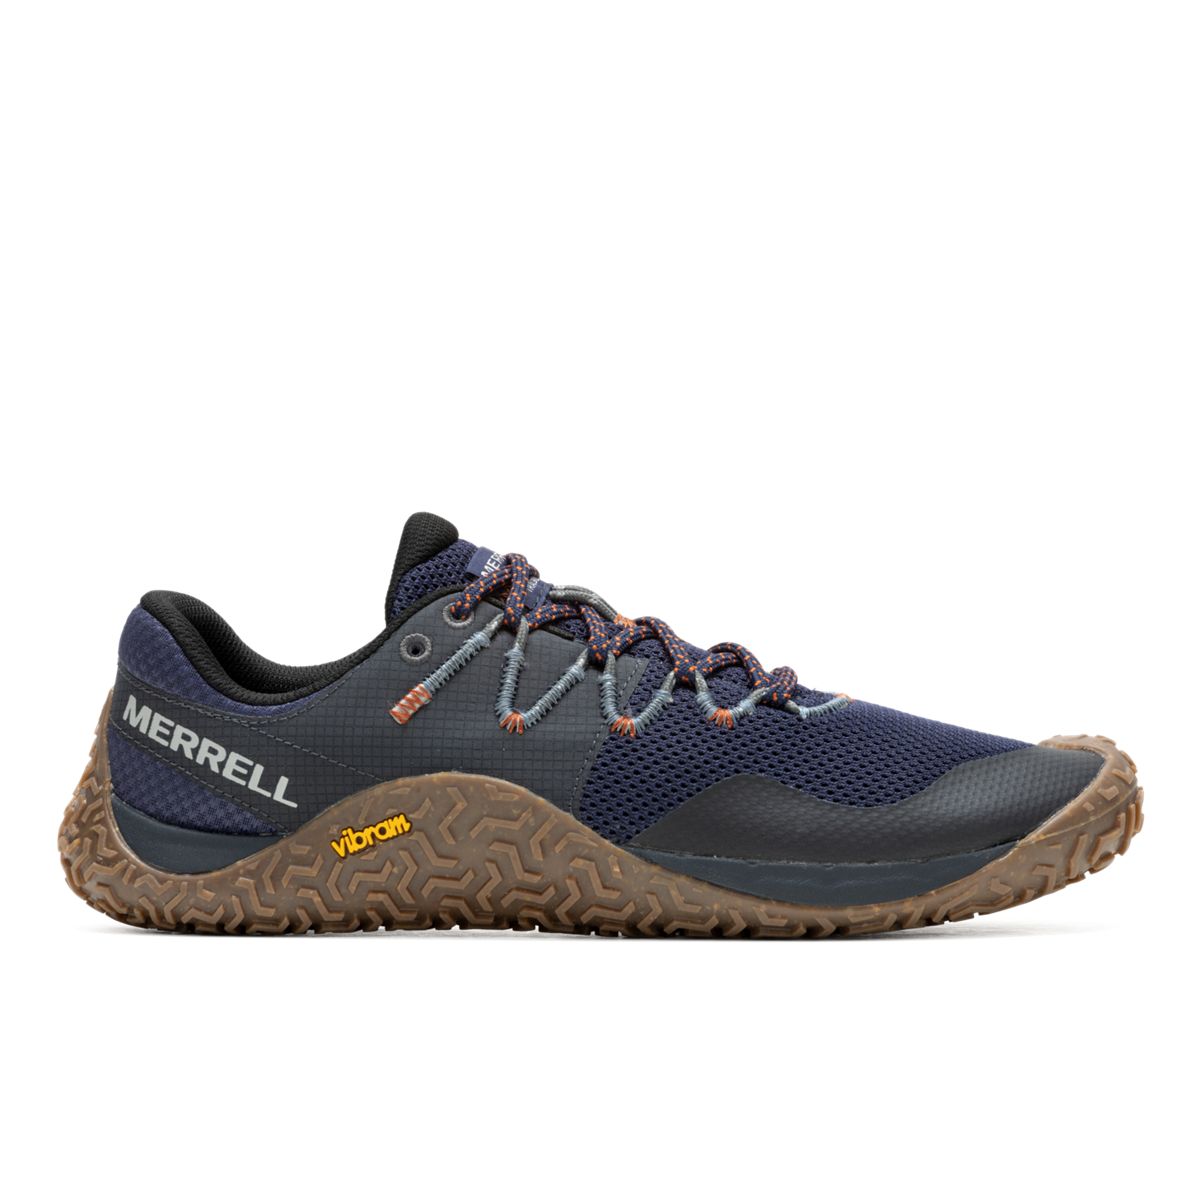 Merrell All Out Shine Trail Running Shoes Barefoot Black Blue J06332 Womens  9M